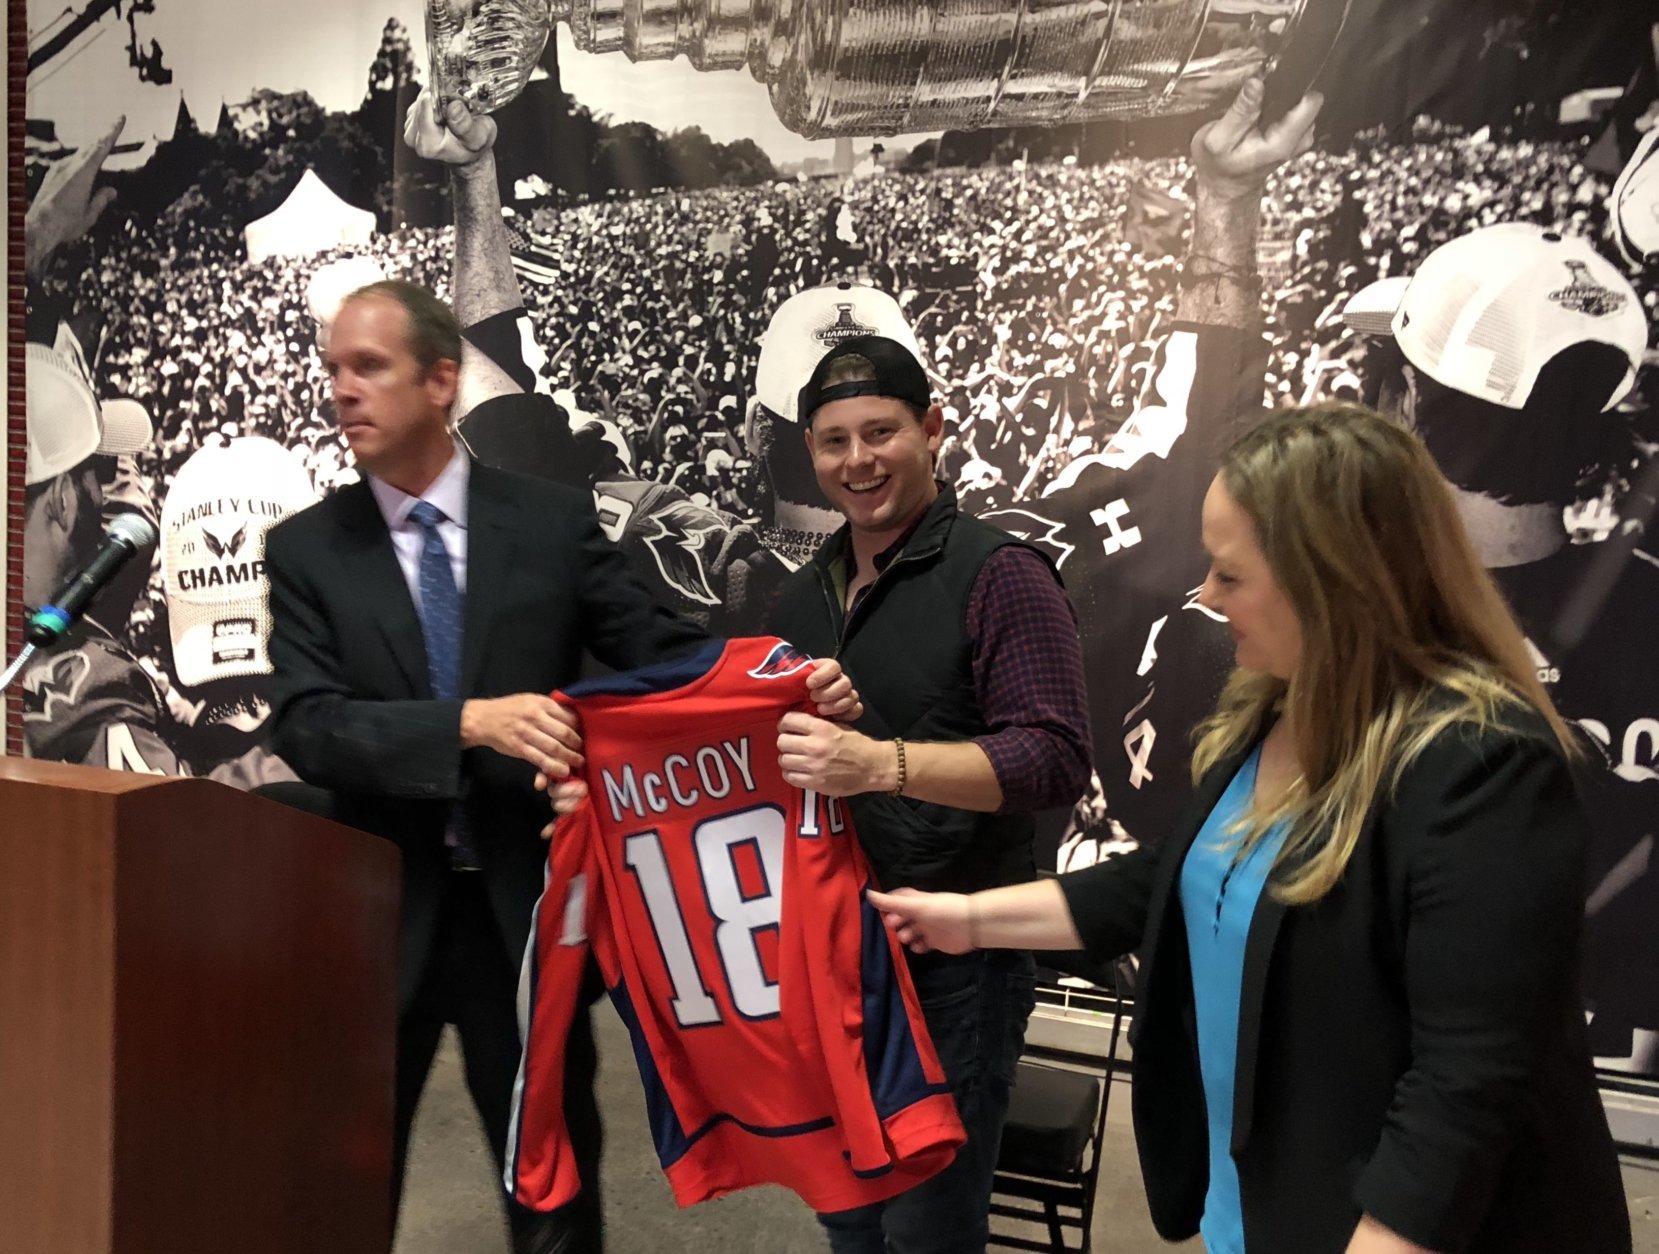 "I'm a D.C. boy, born and raised," Lucky Buns owner and chef, Alex McCoy said. "I've had a lot of really good times here in this arena." Pictured with President of Venues for Monumental Sports & Entertainment, David Touhey and Aramark's Liz Noe at the unveiling of Capital One Arena’s renovated venue, food and drink experience. (WTOP/Kristi King)